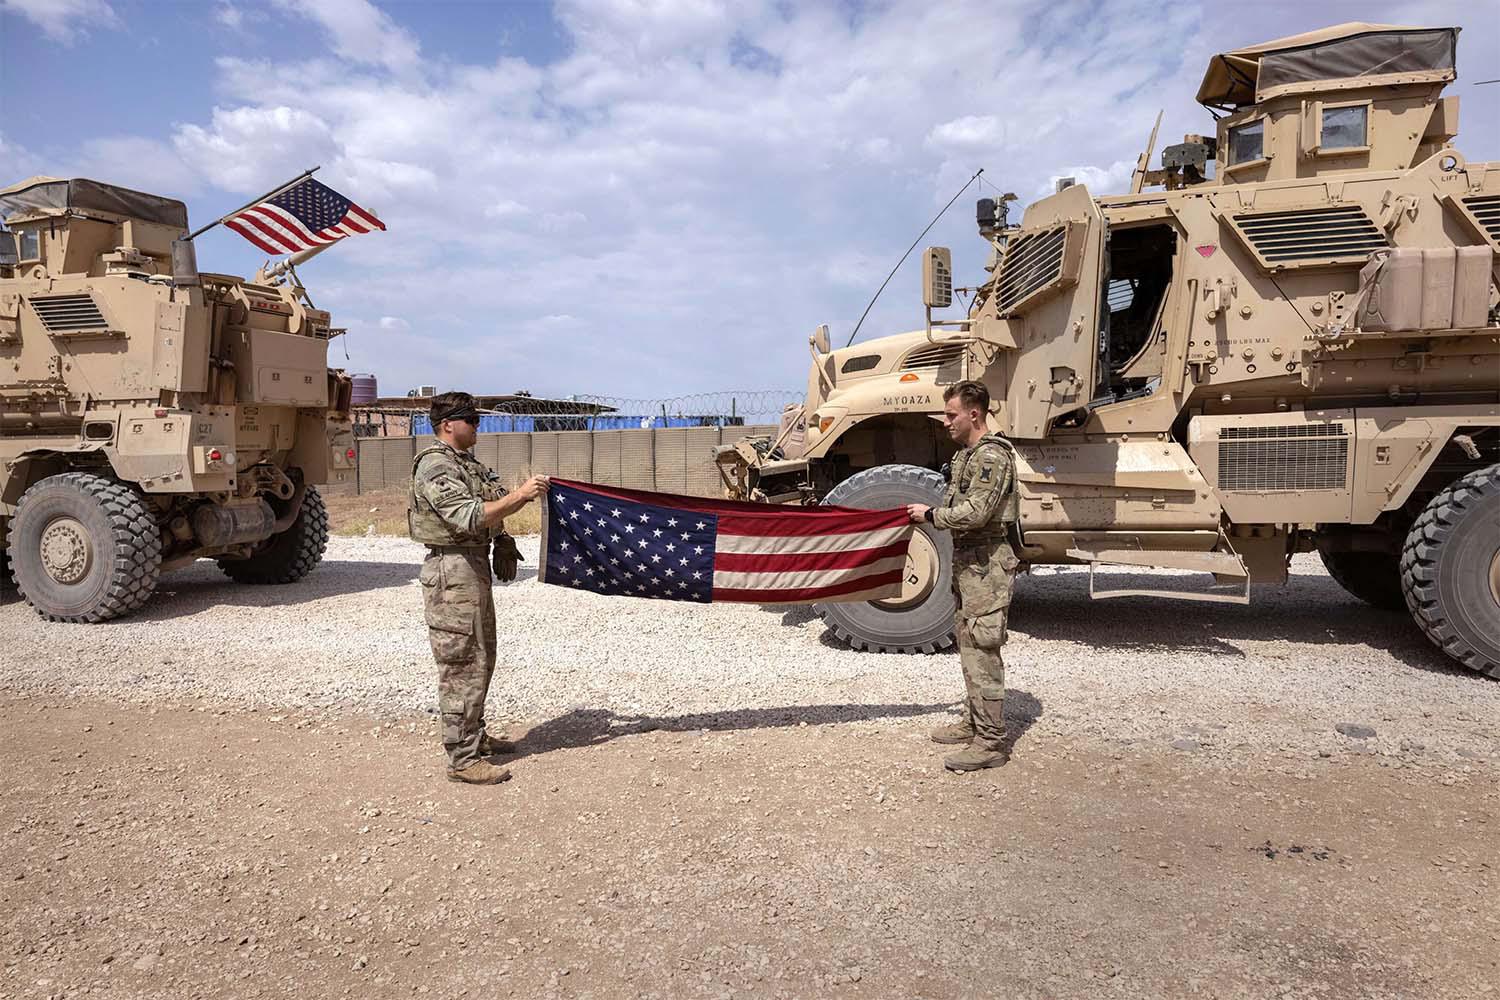 US troops in Syria